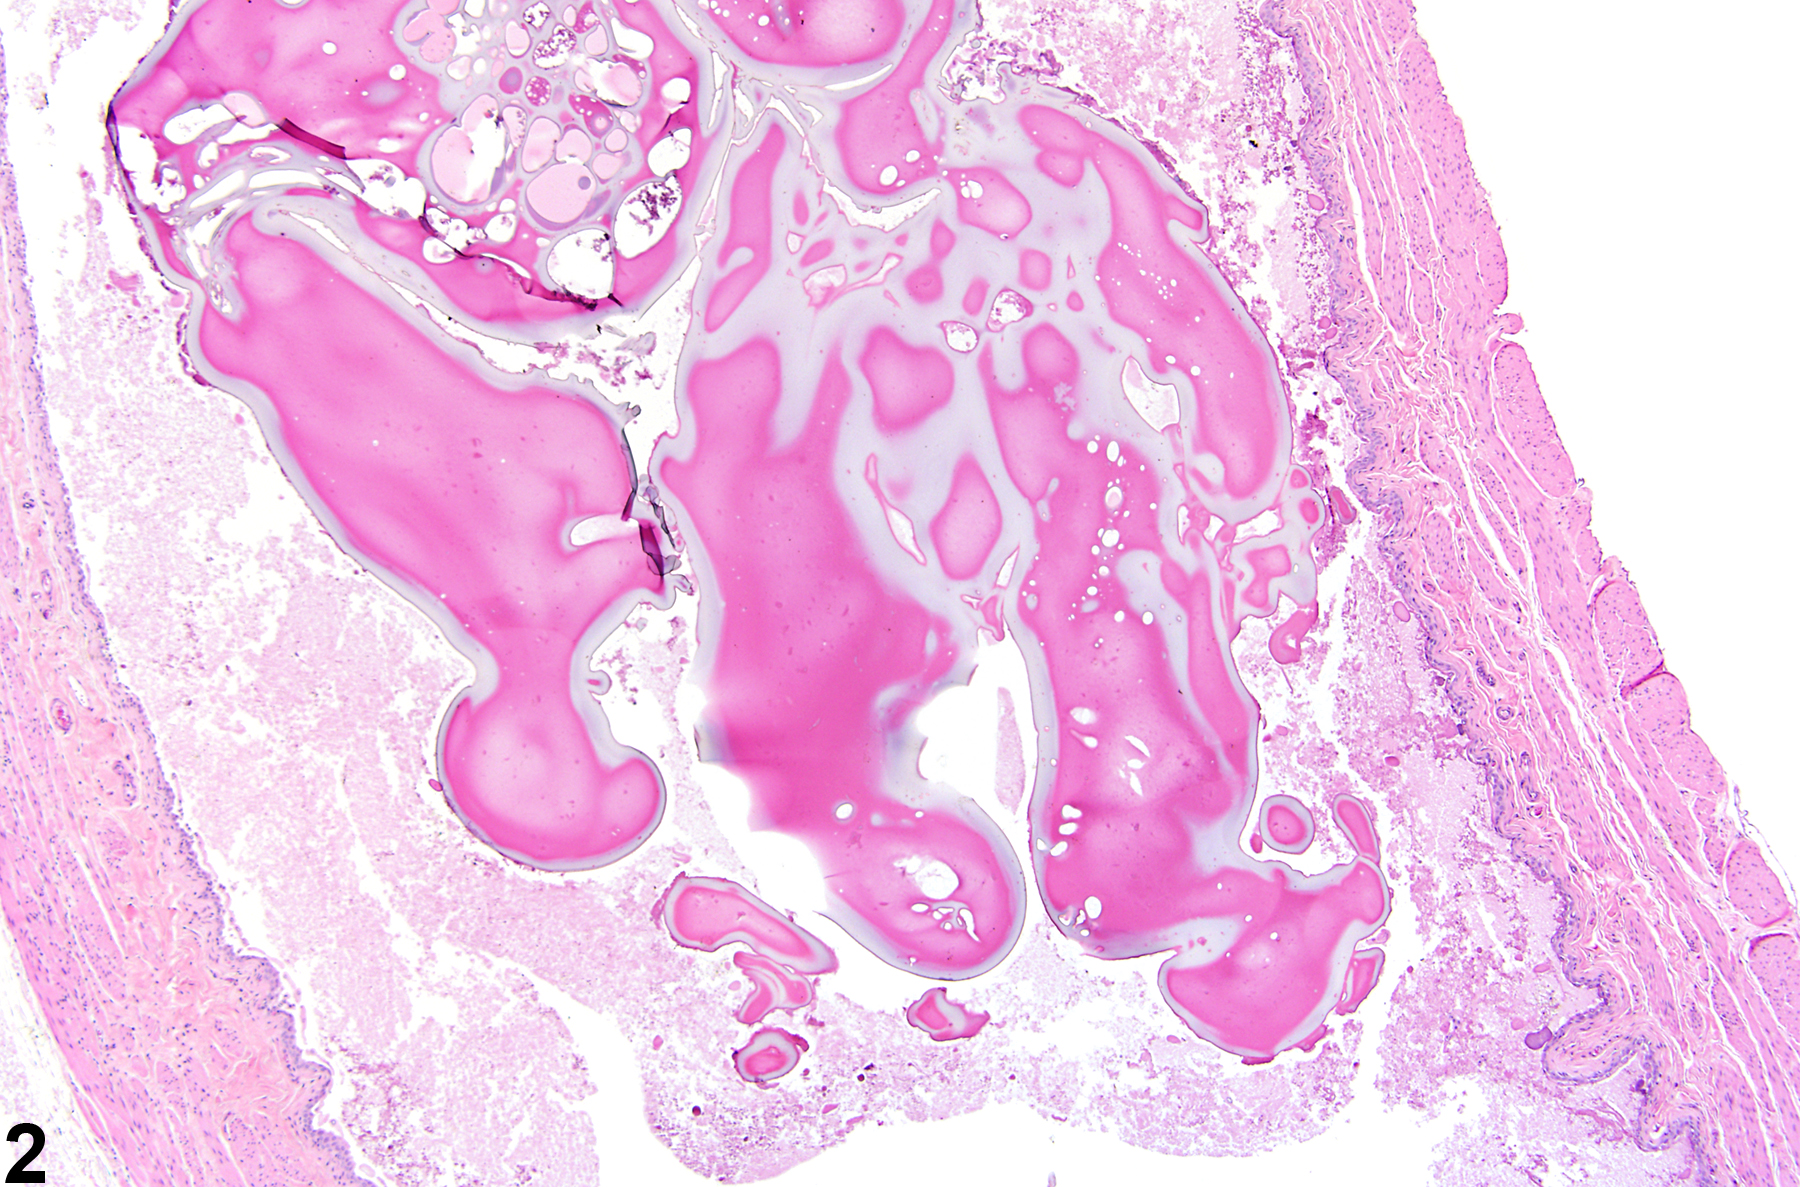 Image of proteinaceous plug in the urinary bladder from a male  F344/N rat in an acute study